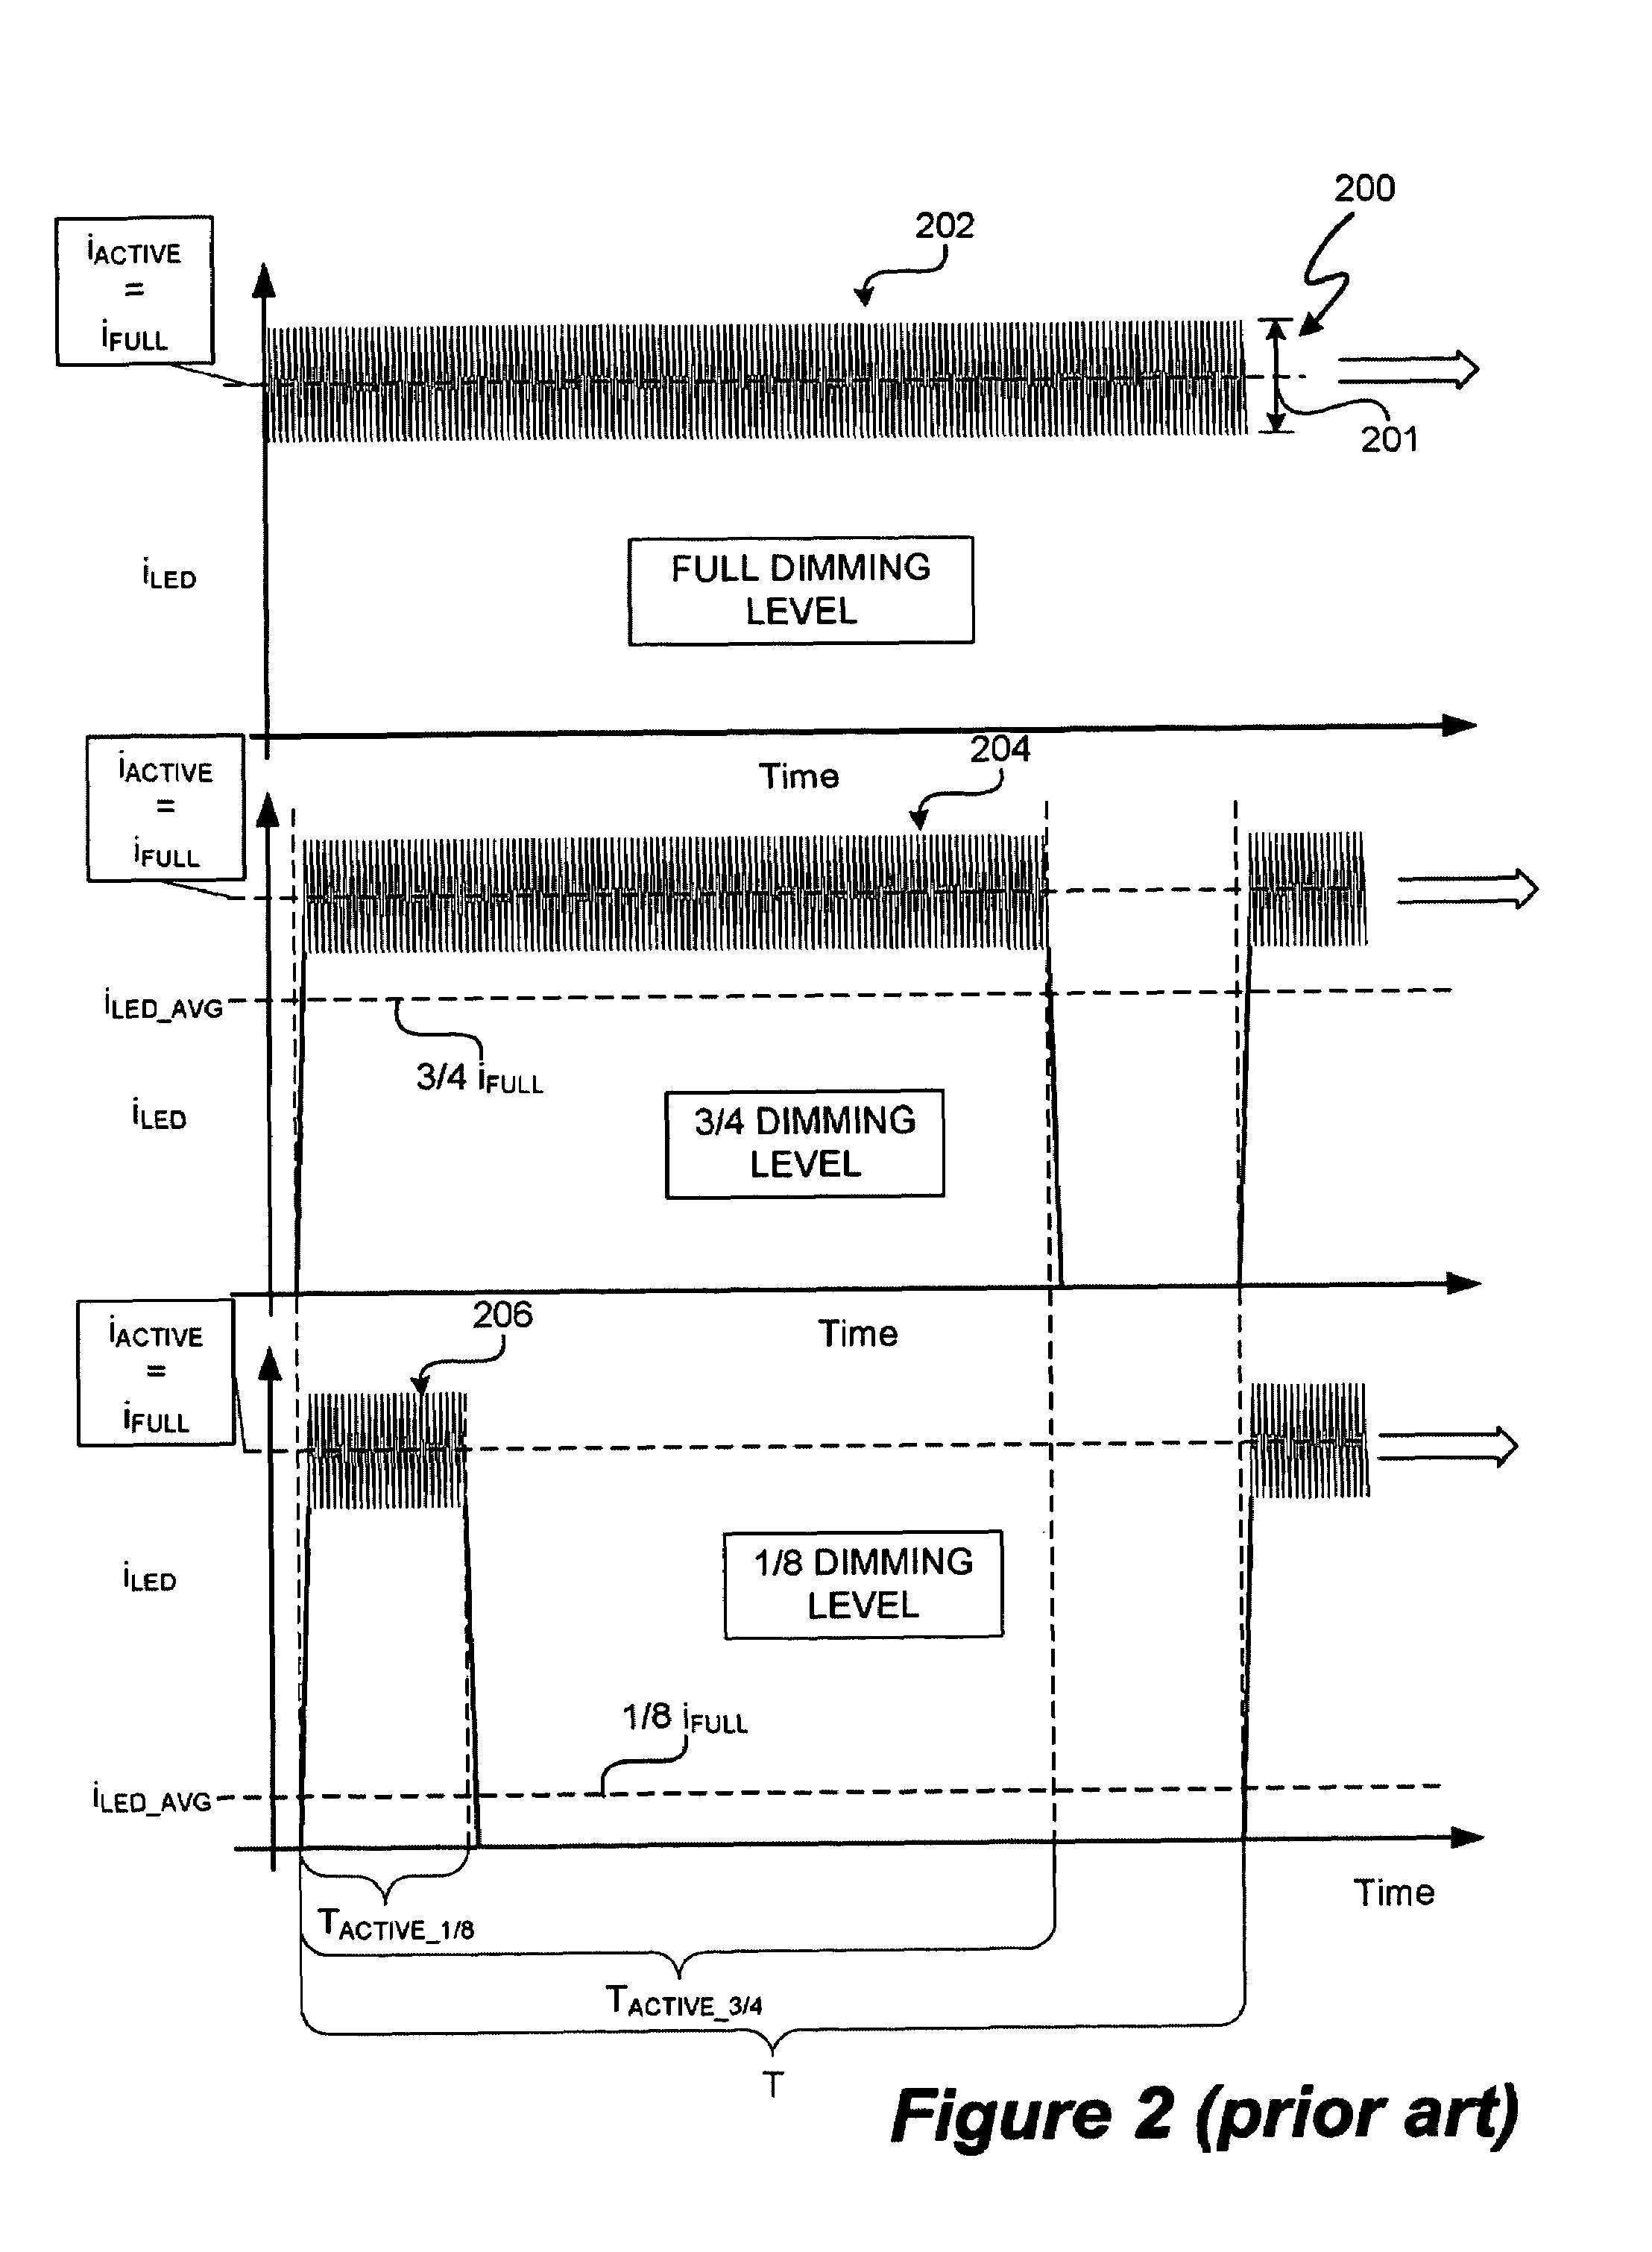 LED lighting system with a multiple mode current control dimming strategy